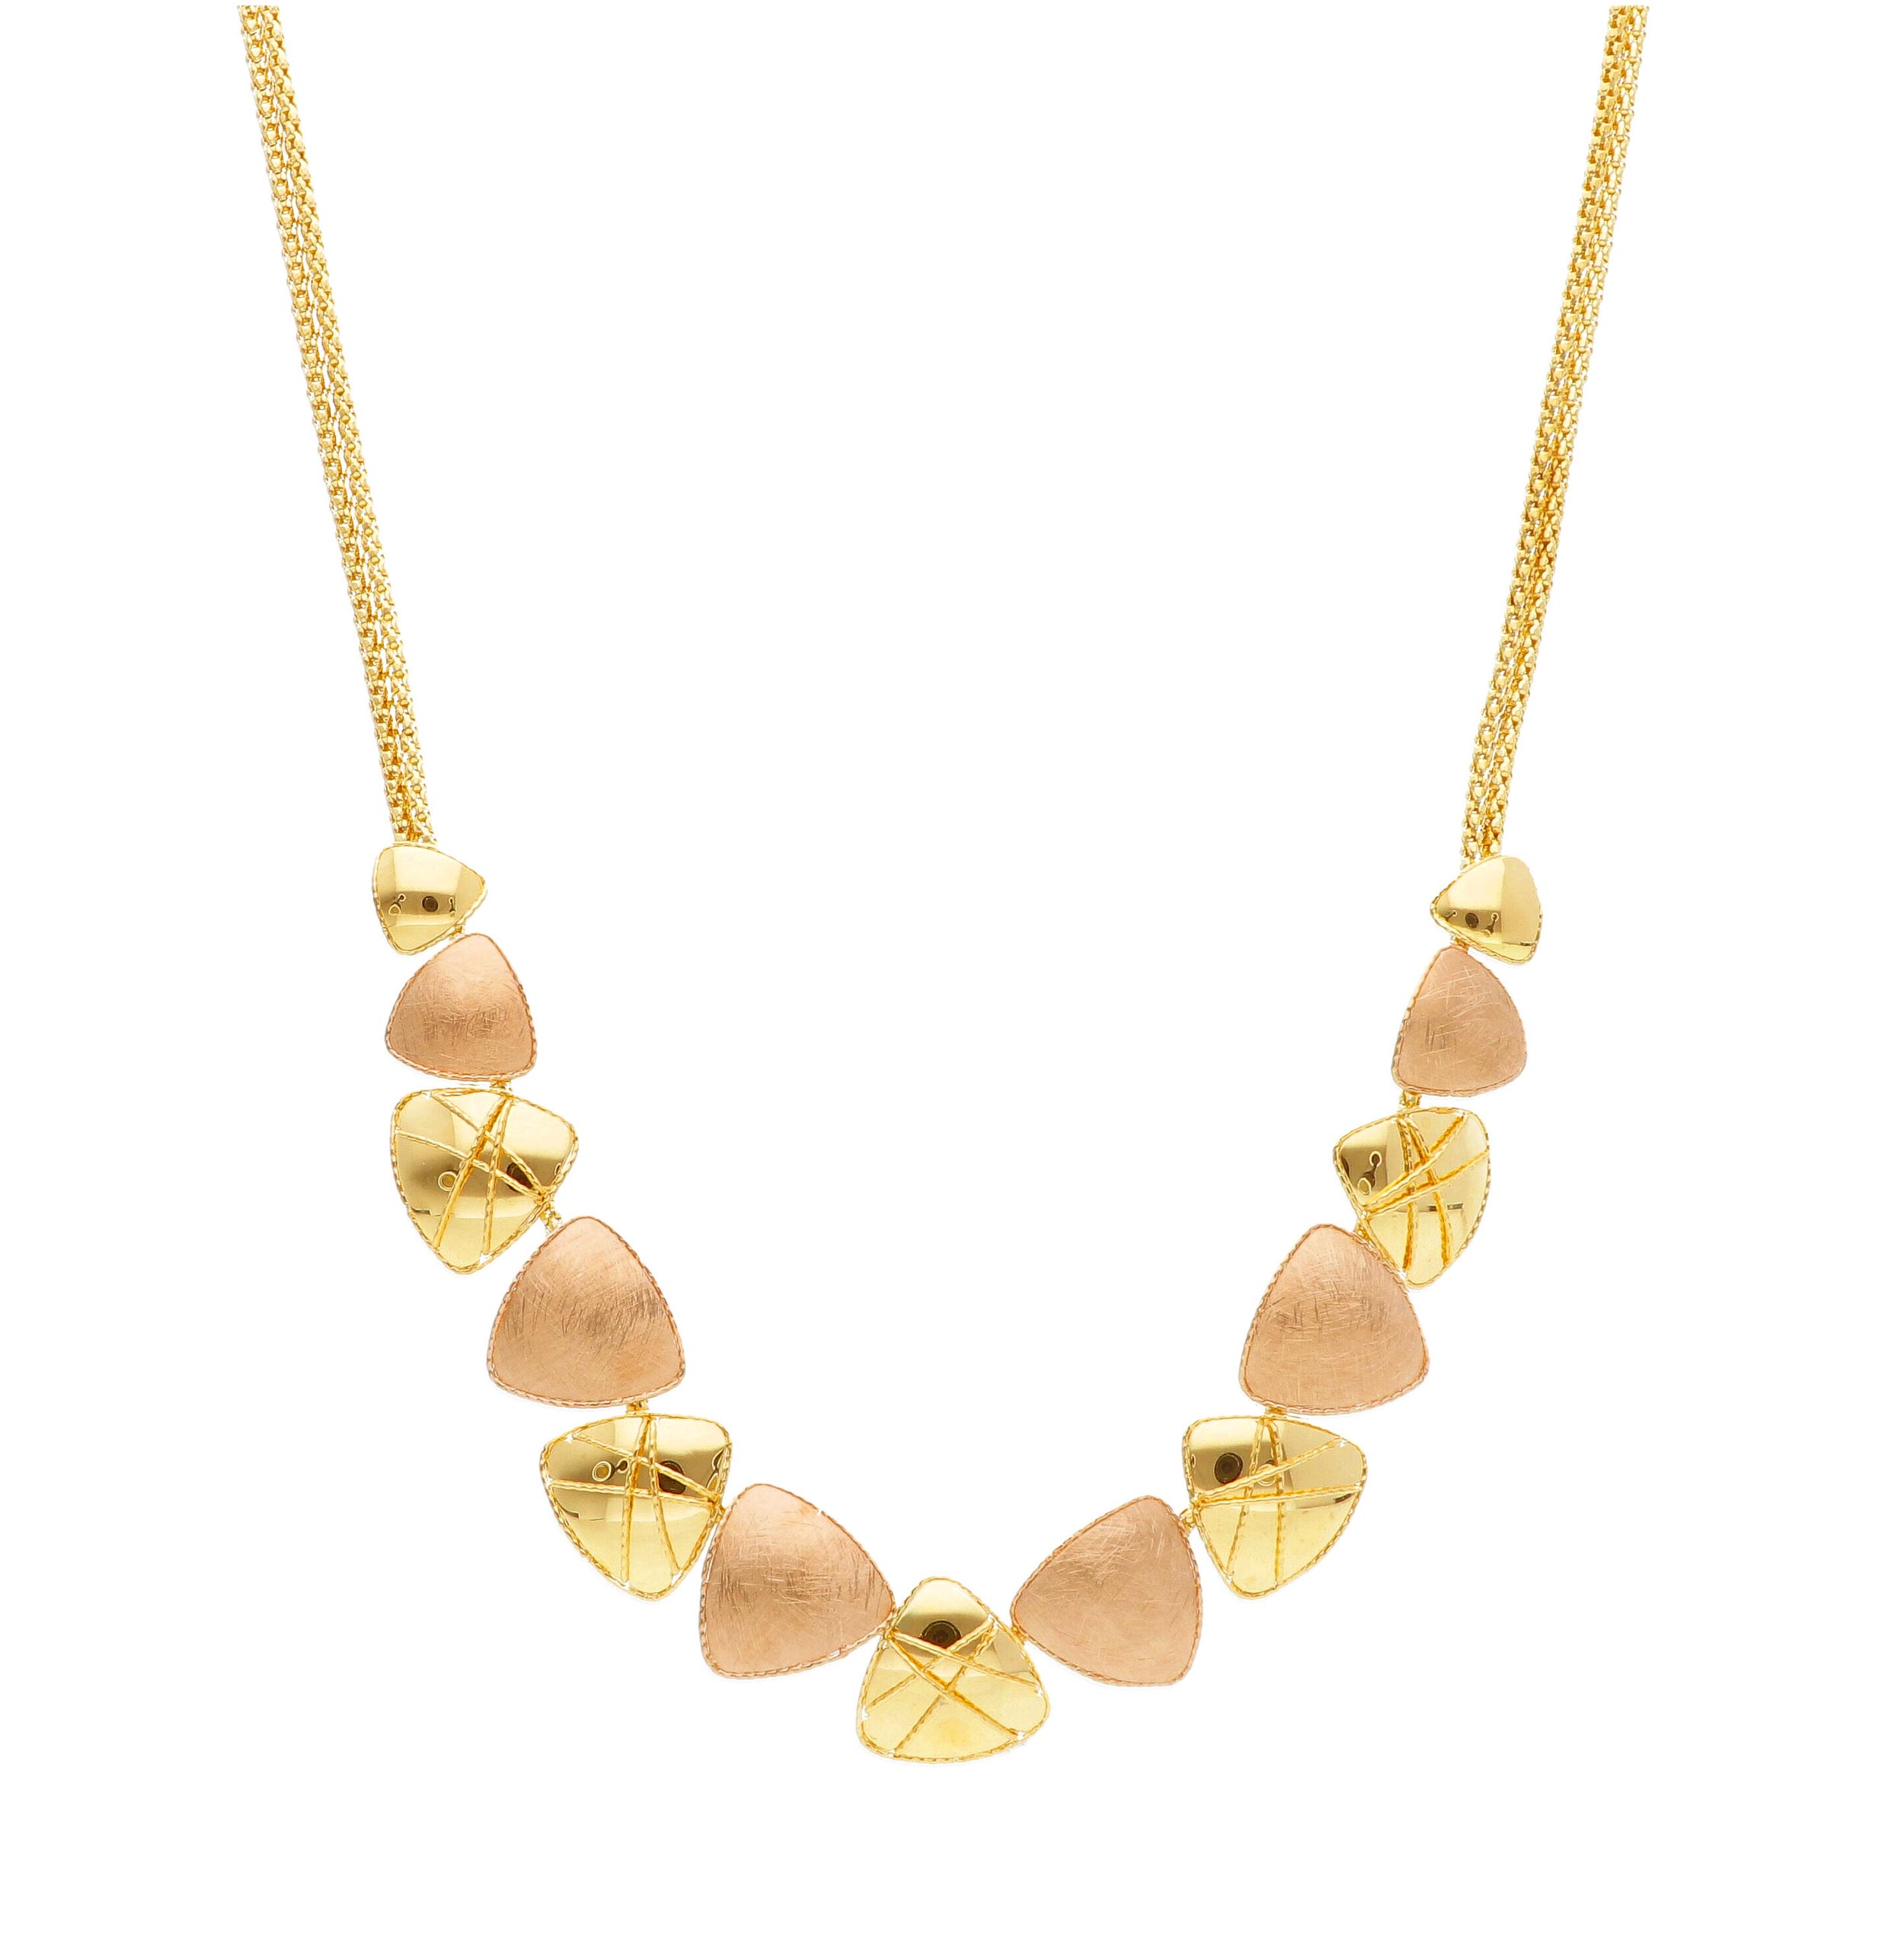 Beautiful 18ct Yellow Gold 40cm Necklace